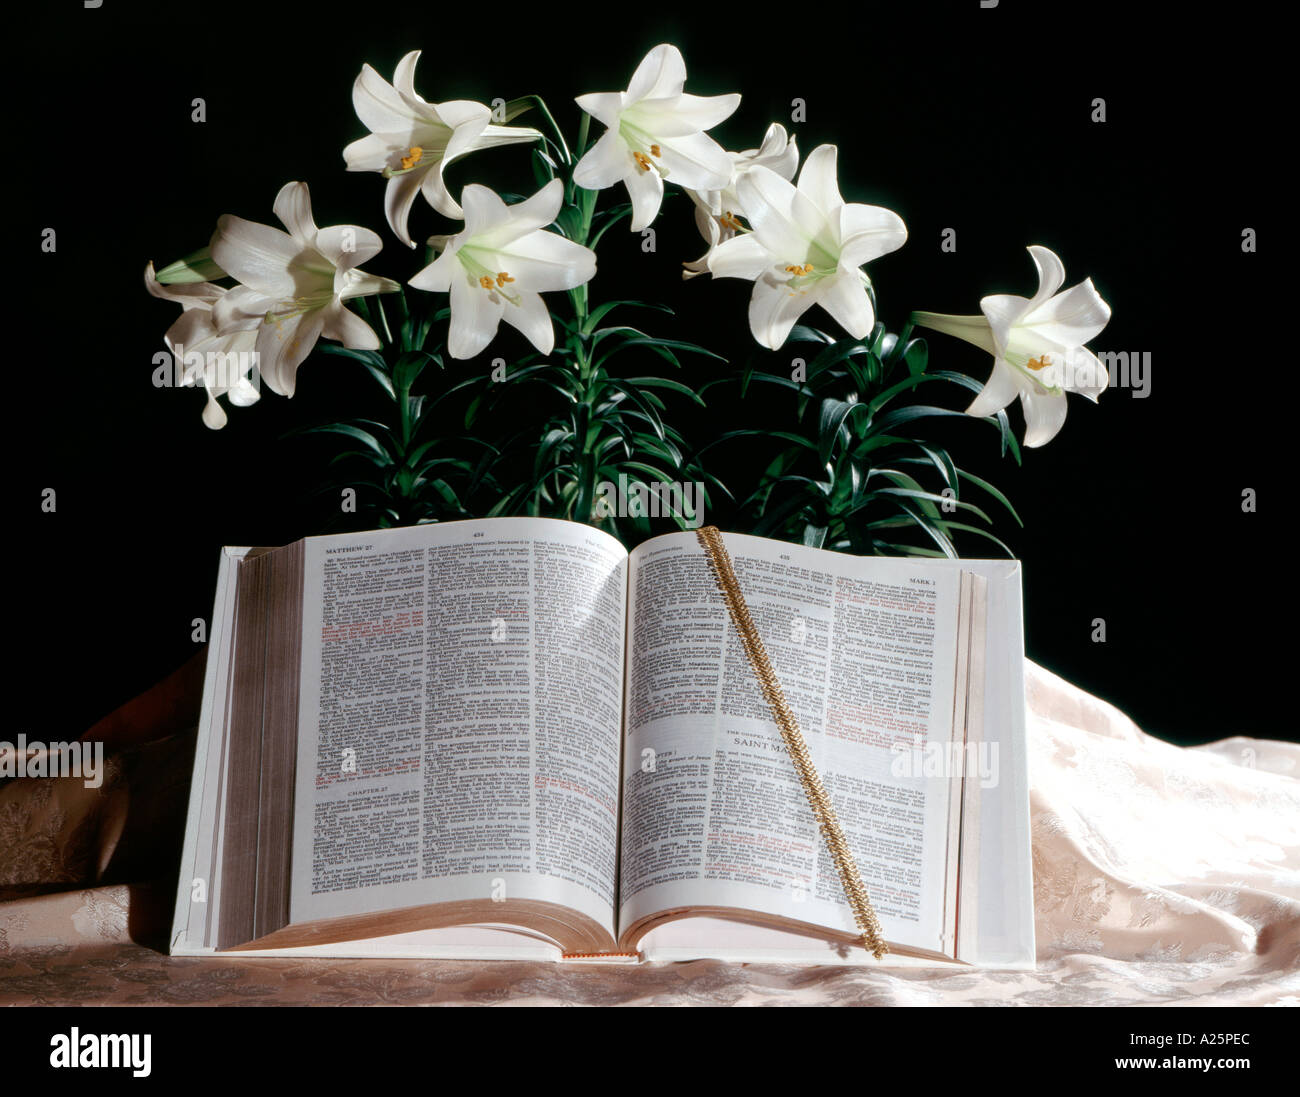 Easter still life with Bible and display of Easter lilies Stock Photo